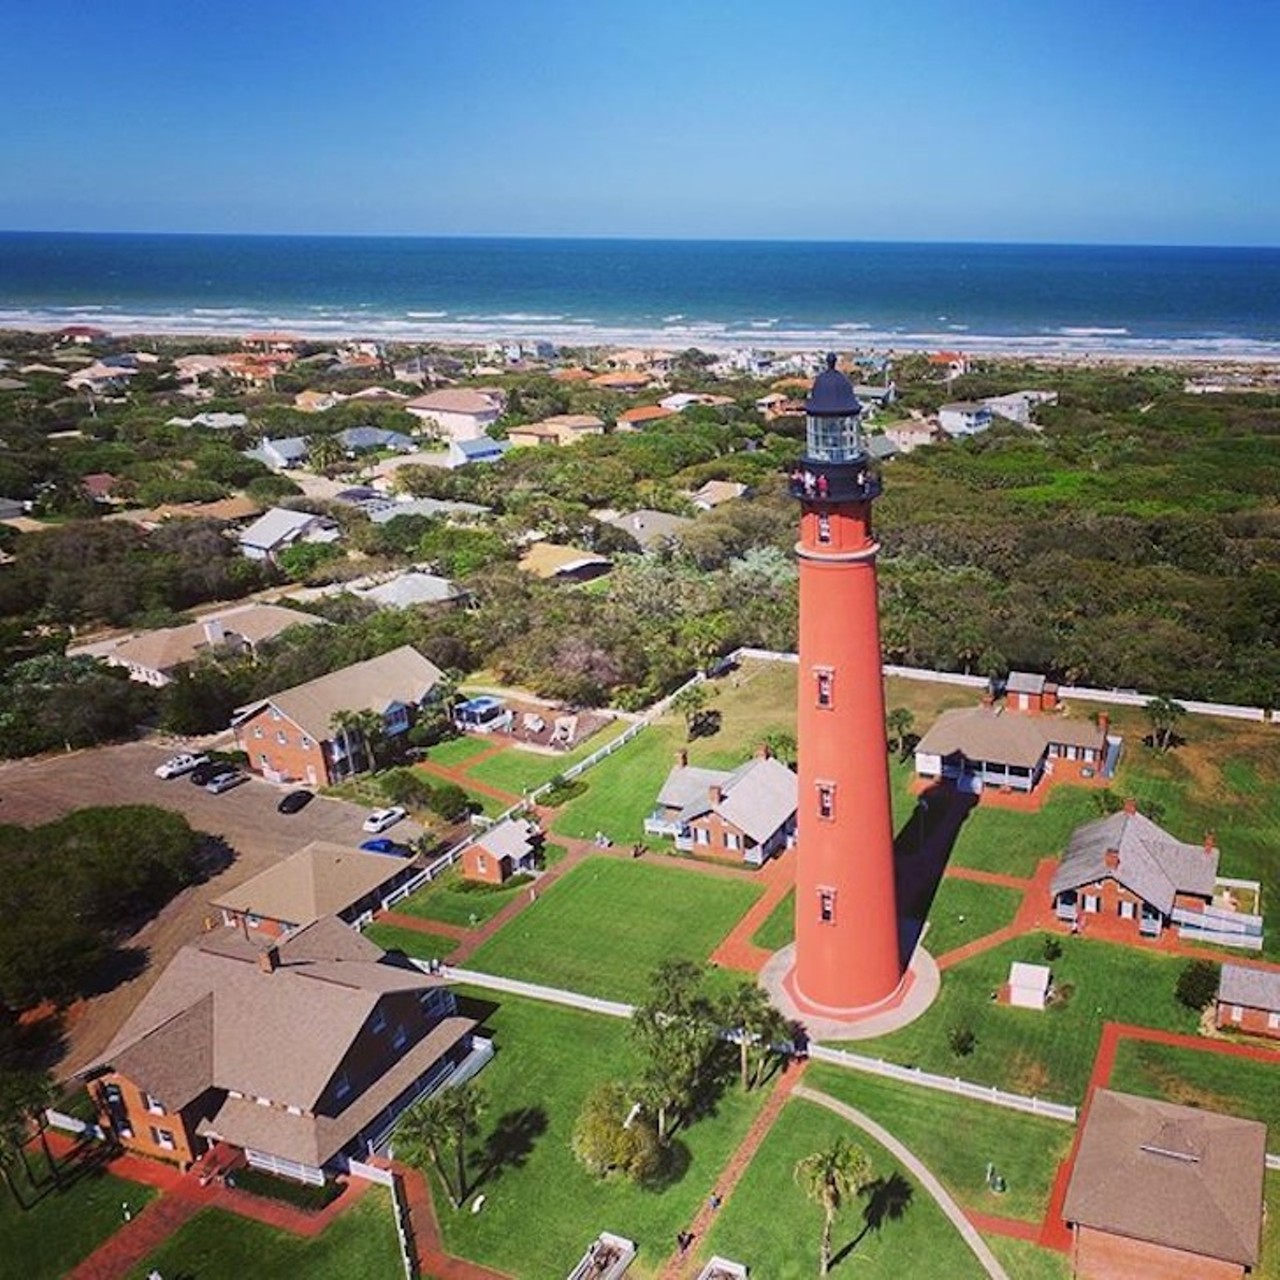 PONCE INLET
Ponce Inlet is a hot spot in Florida for shelling. Wake up early and jog alongside the sunrise, or get your daily cardio in by climbing to the top of their 175-foot lighthouse.
Distance: 1 hour and 19 minutes
Photo via stevenmadow/Instagram